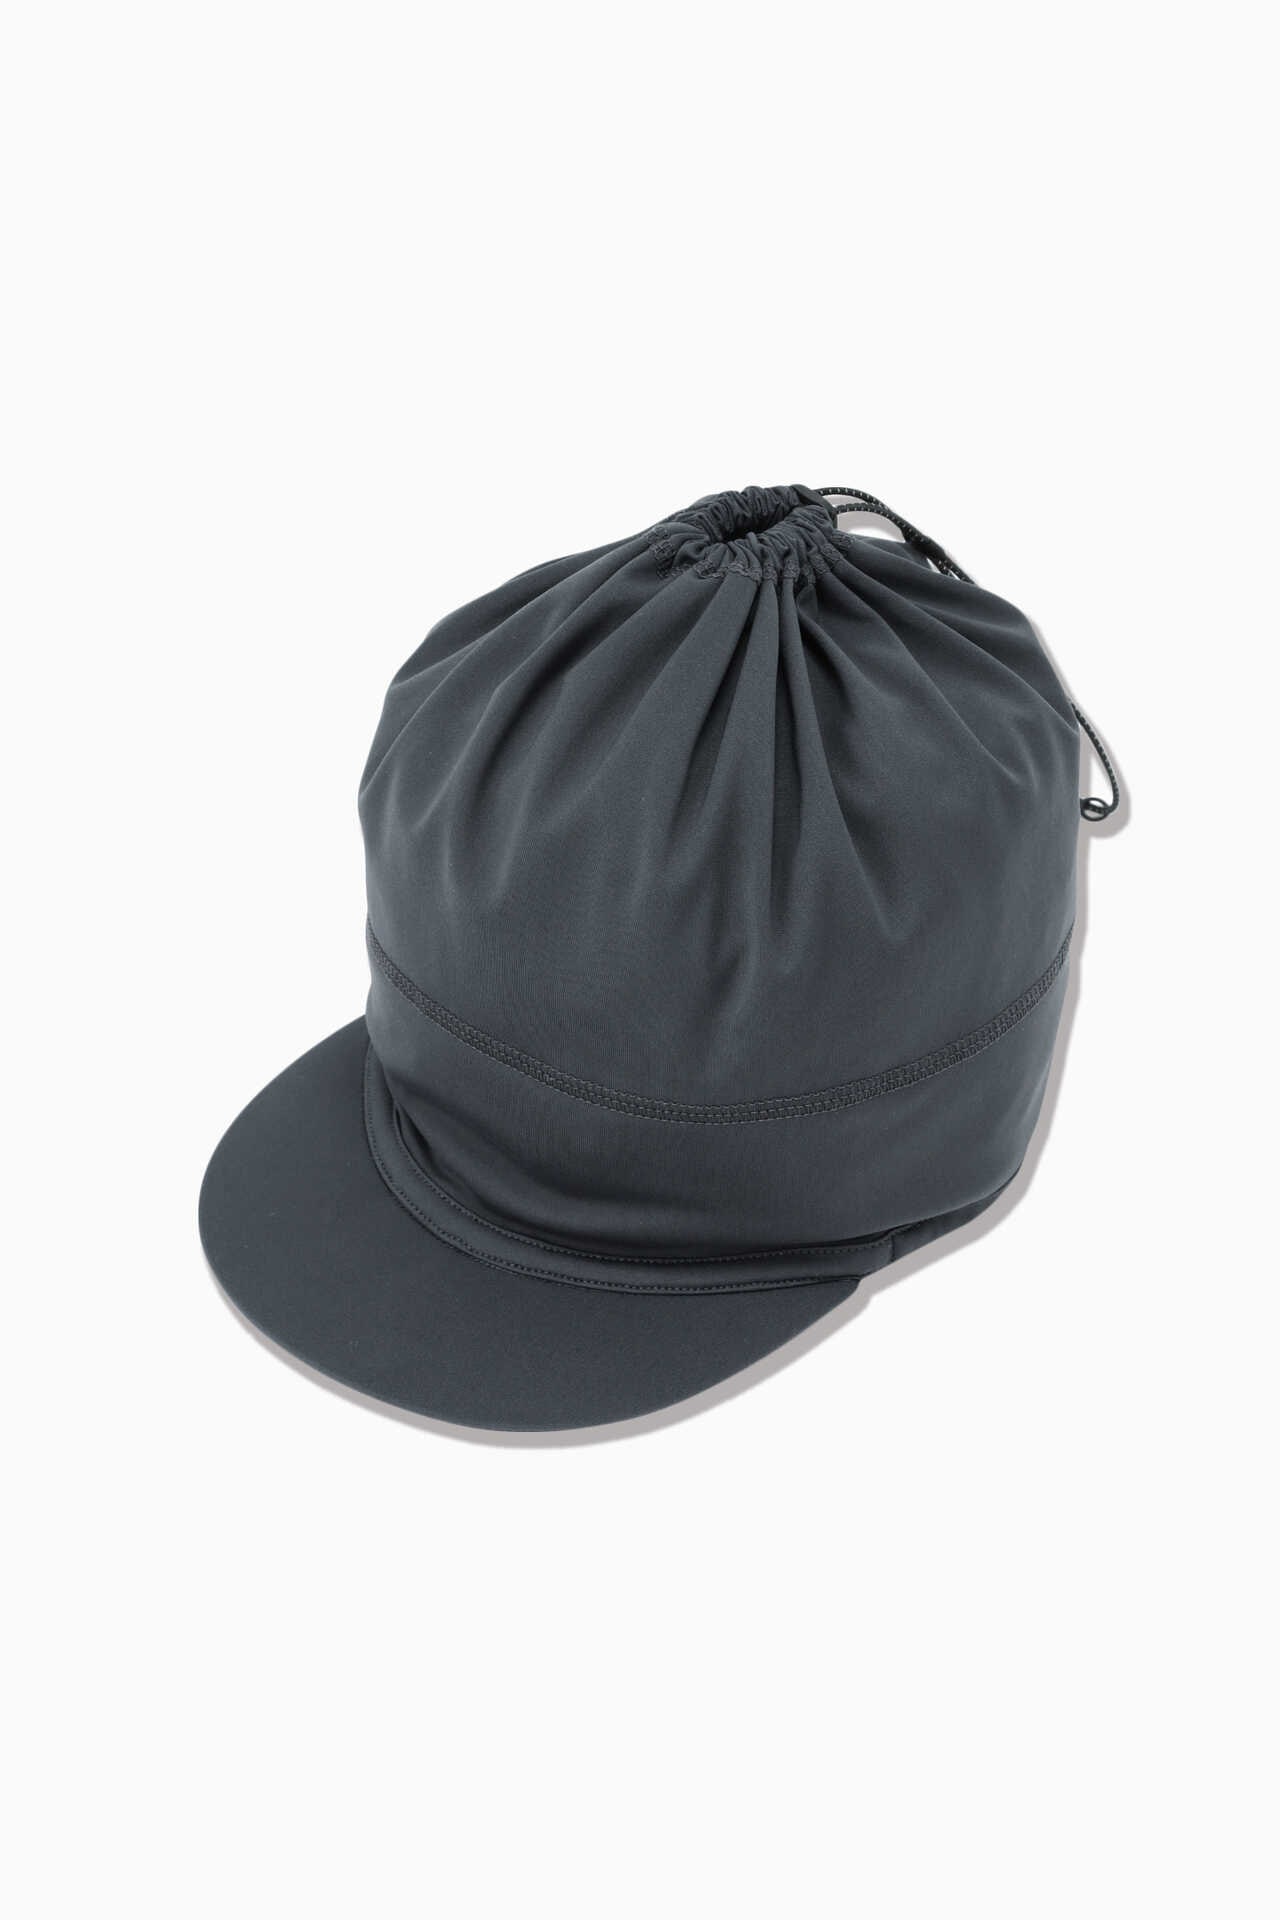 soft shell cap | sale | and wander ONLINE STORE